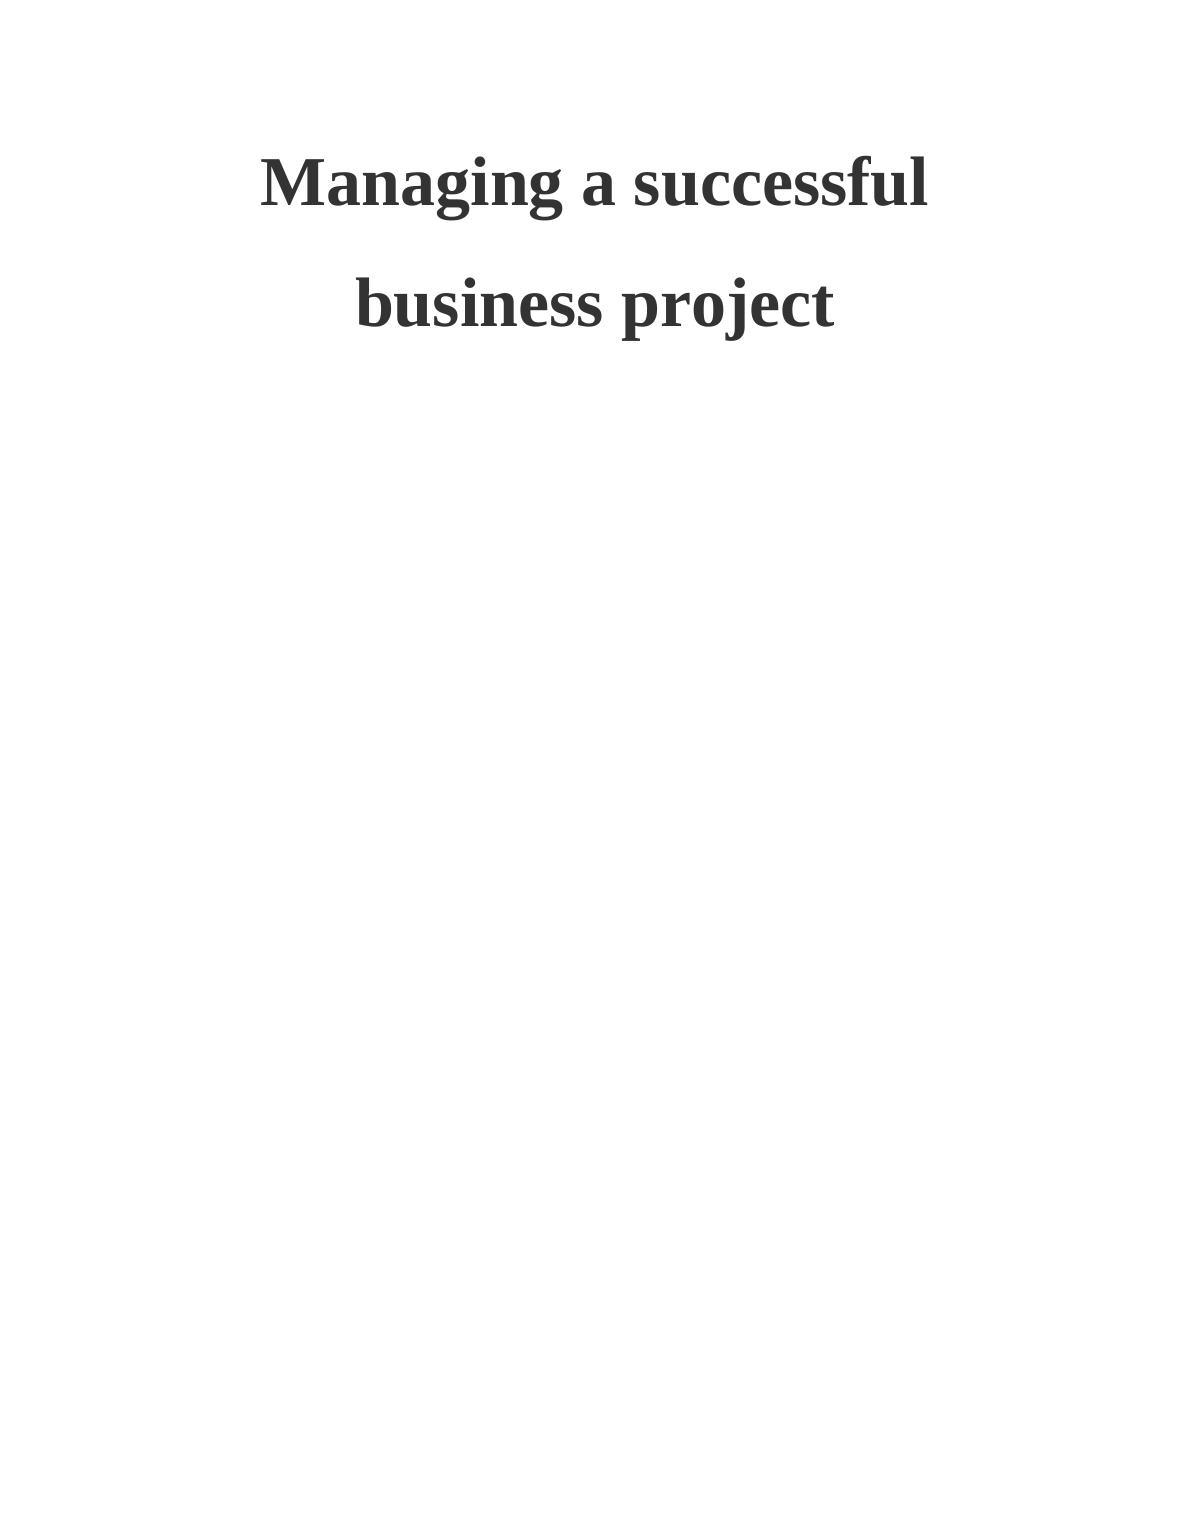 Managing a Successful Business Project - East End_1